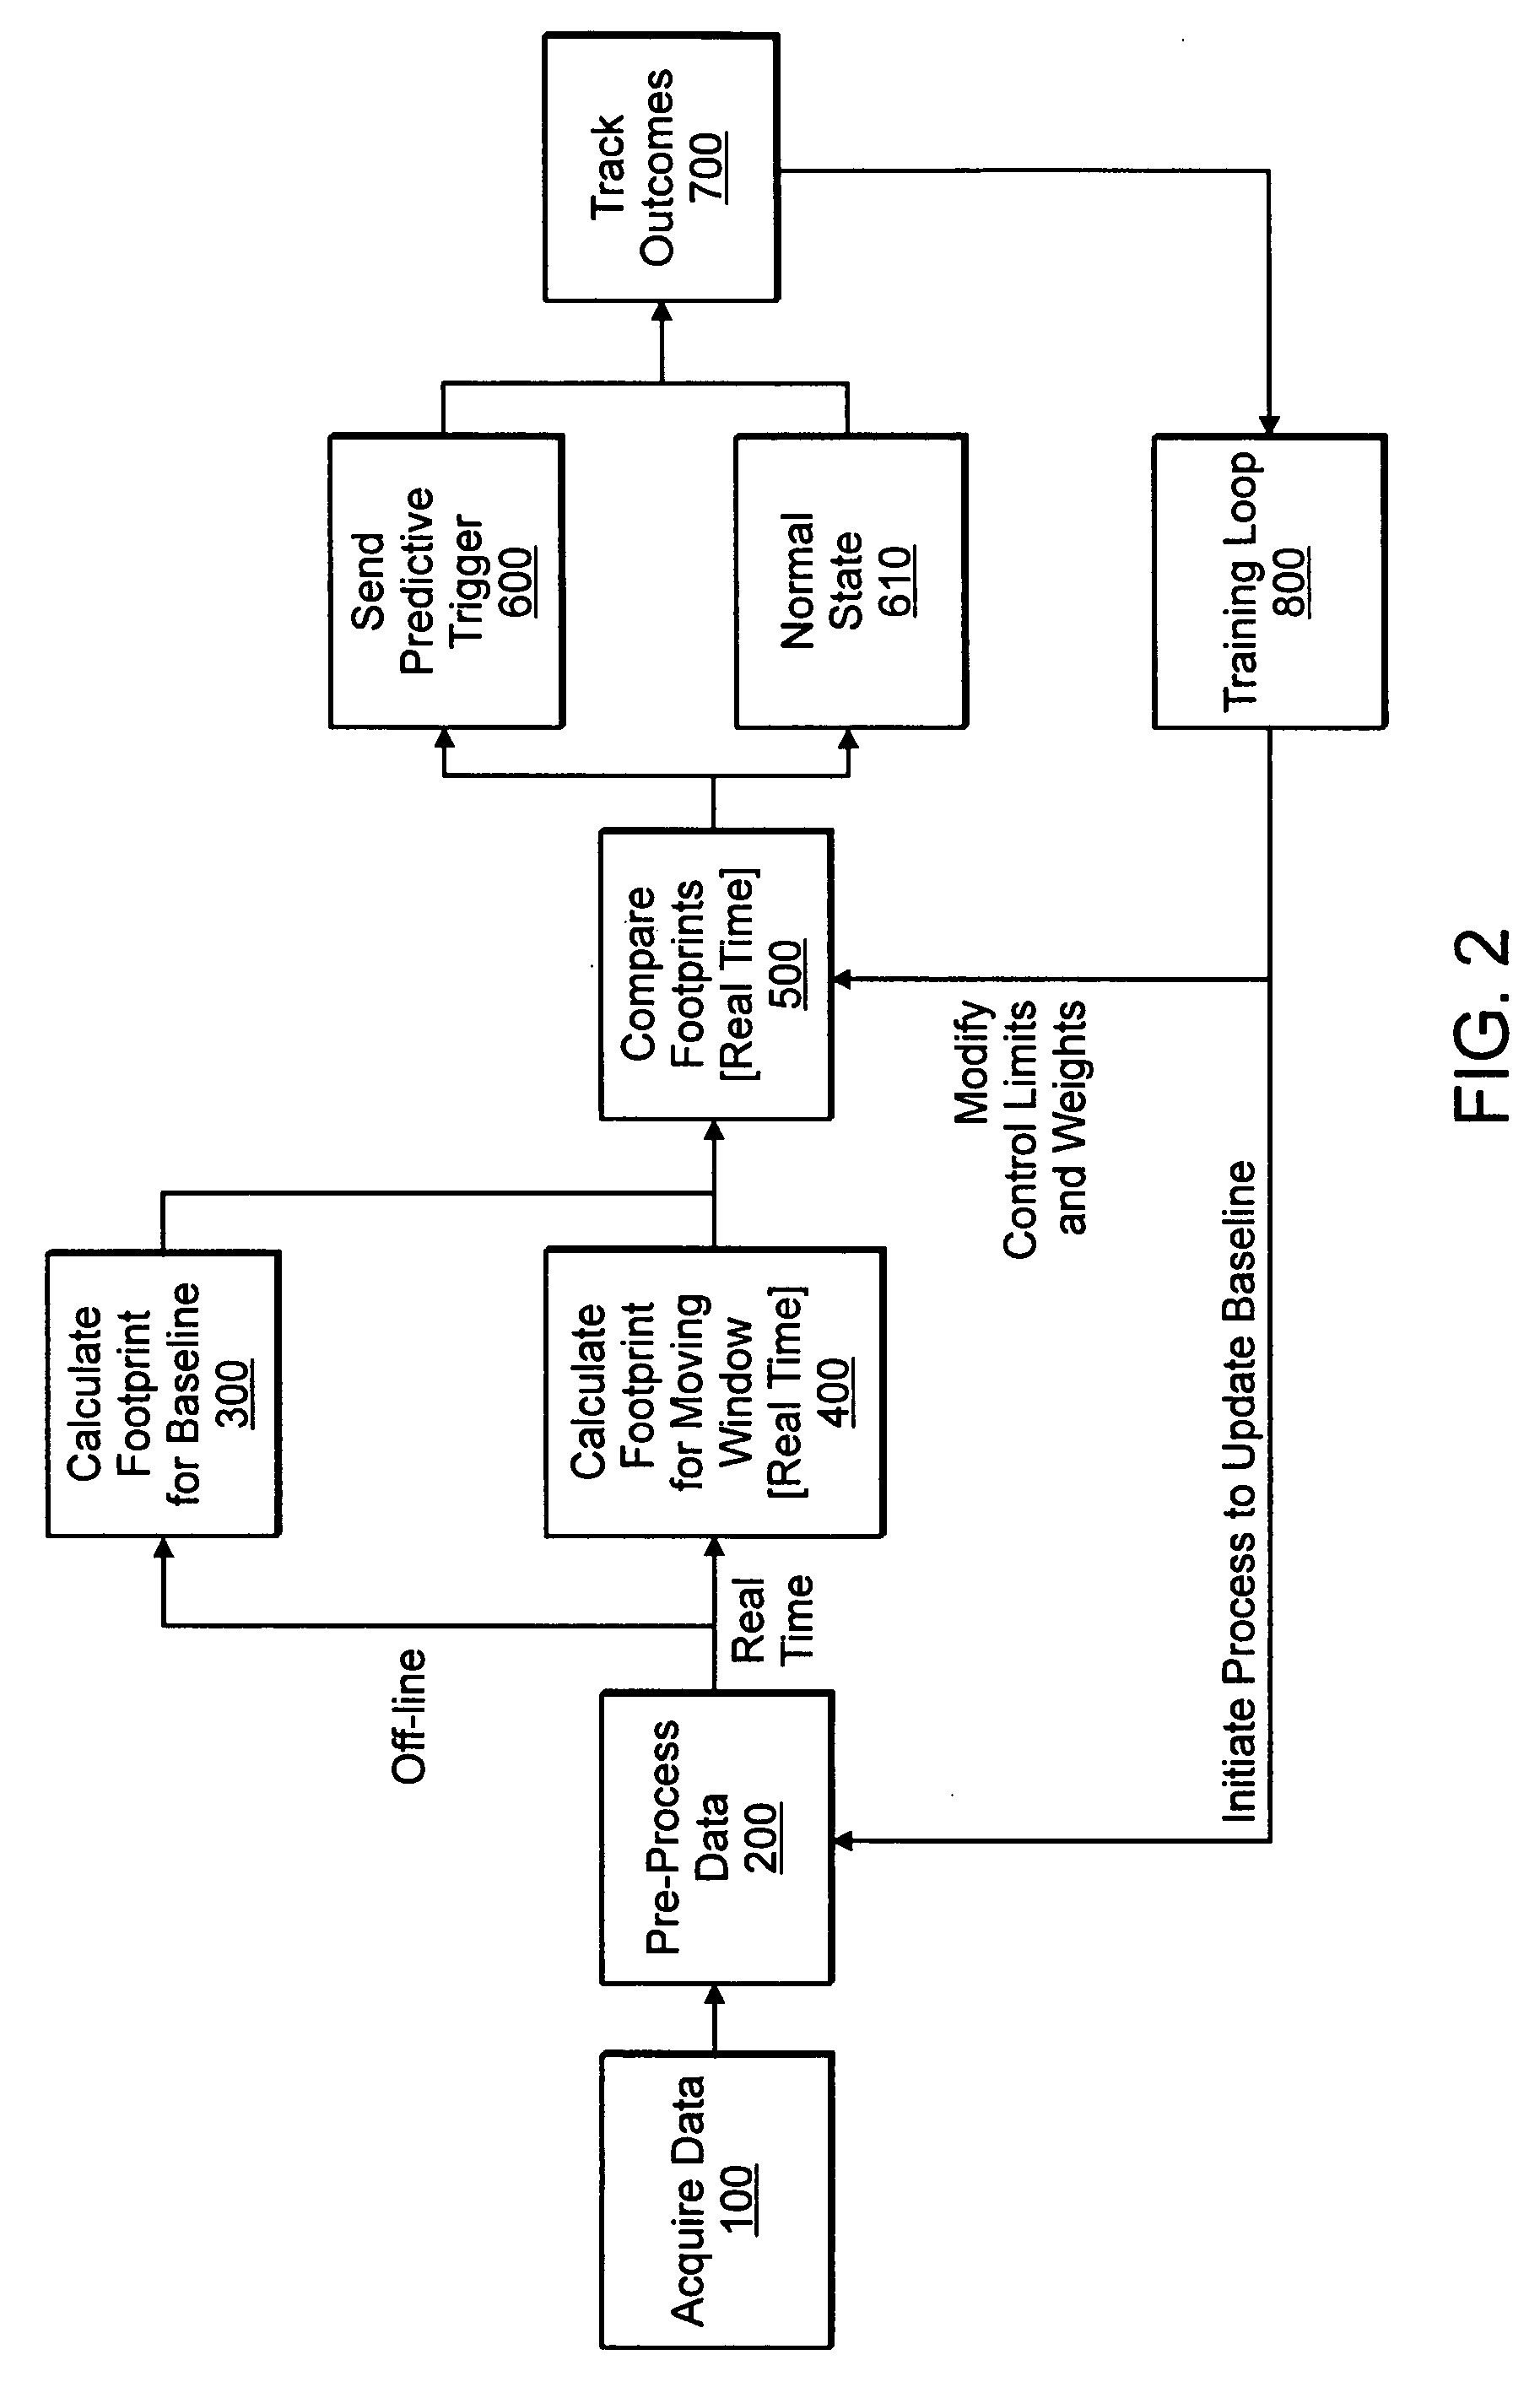 System and method for monitoring performance of groupings of network infrastructure and applications using statistical analysis